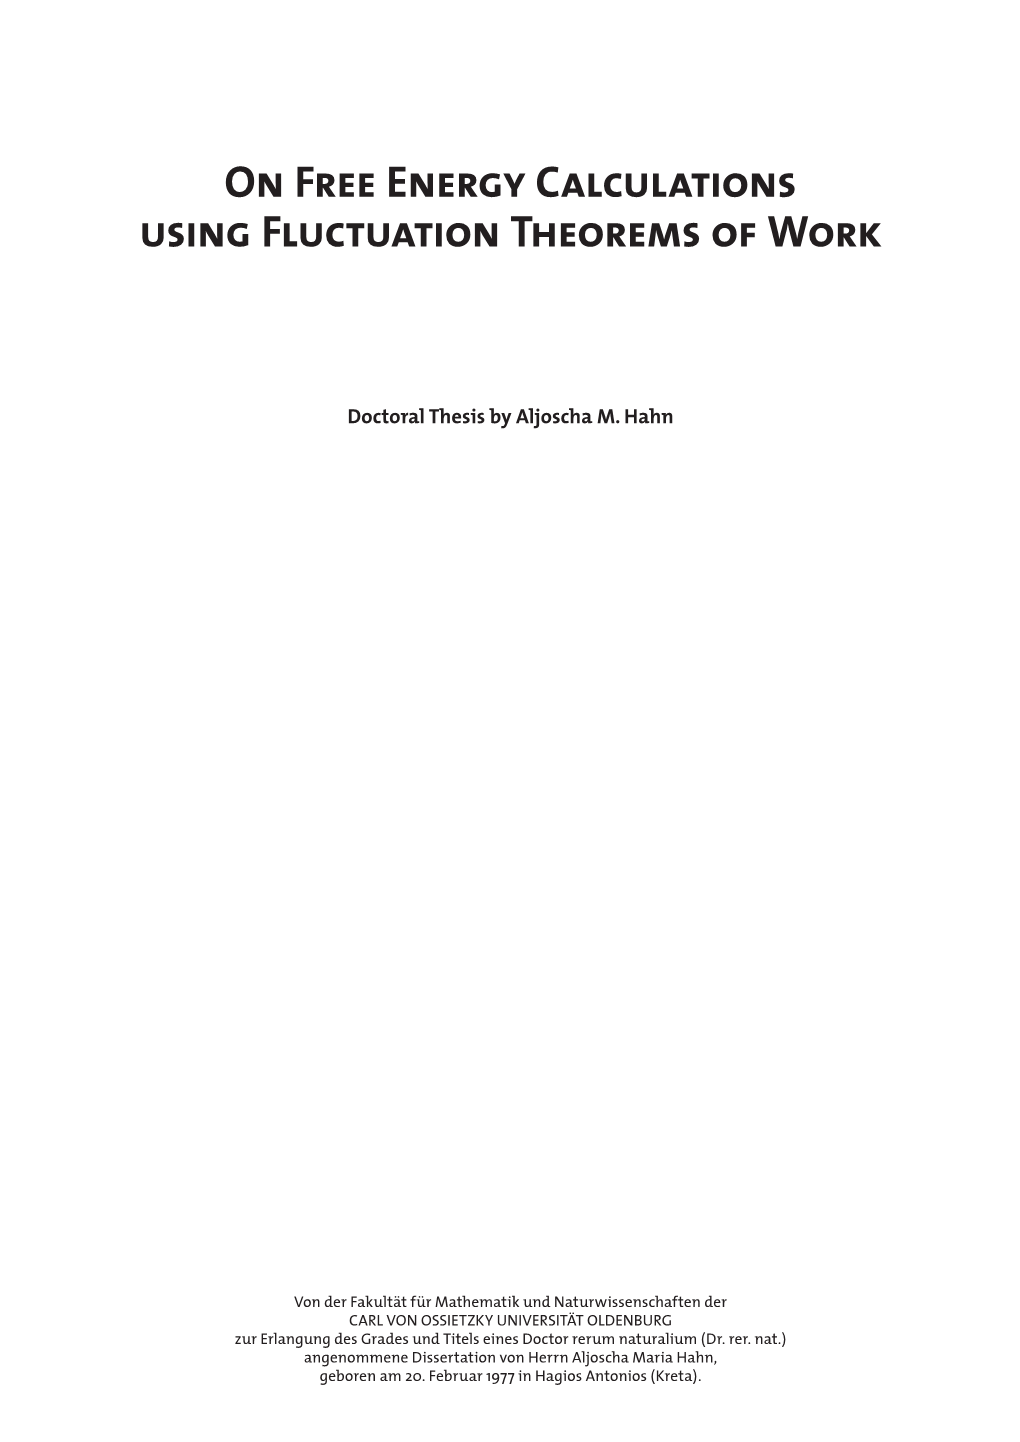 On Free Energy Calculations Using Fluctuation Theorems of Work